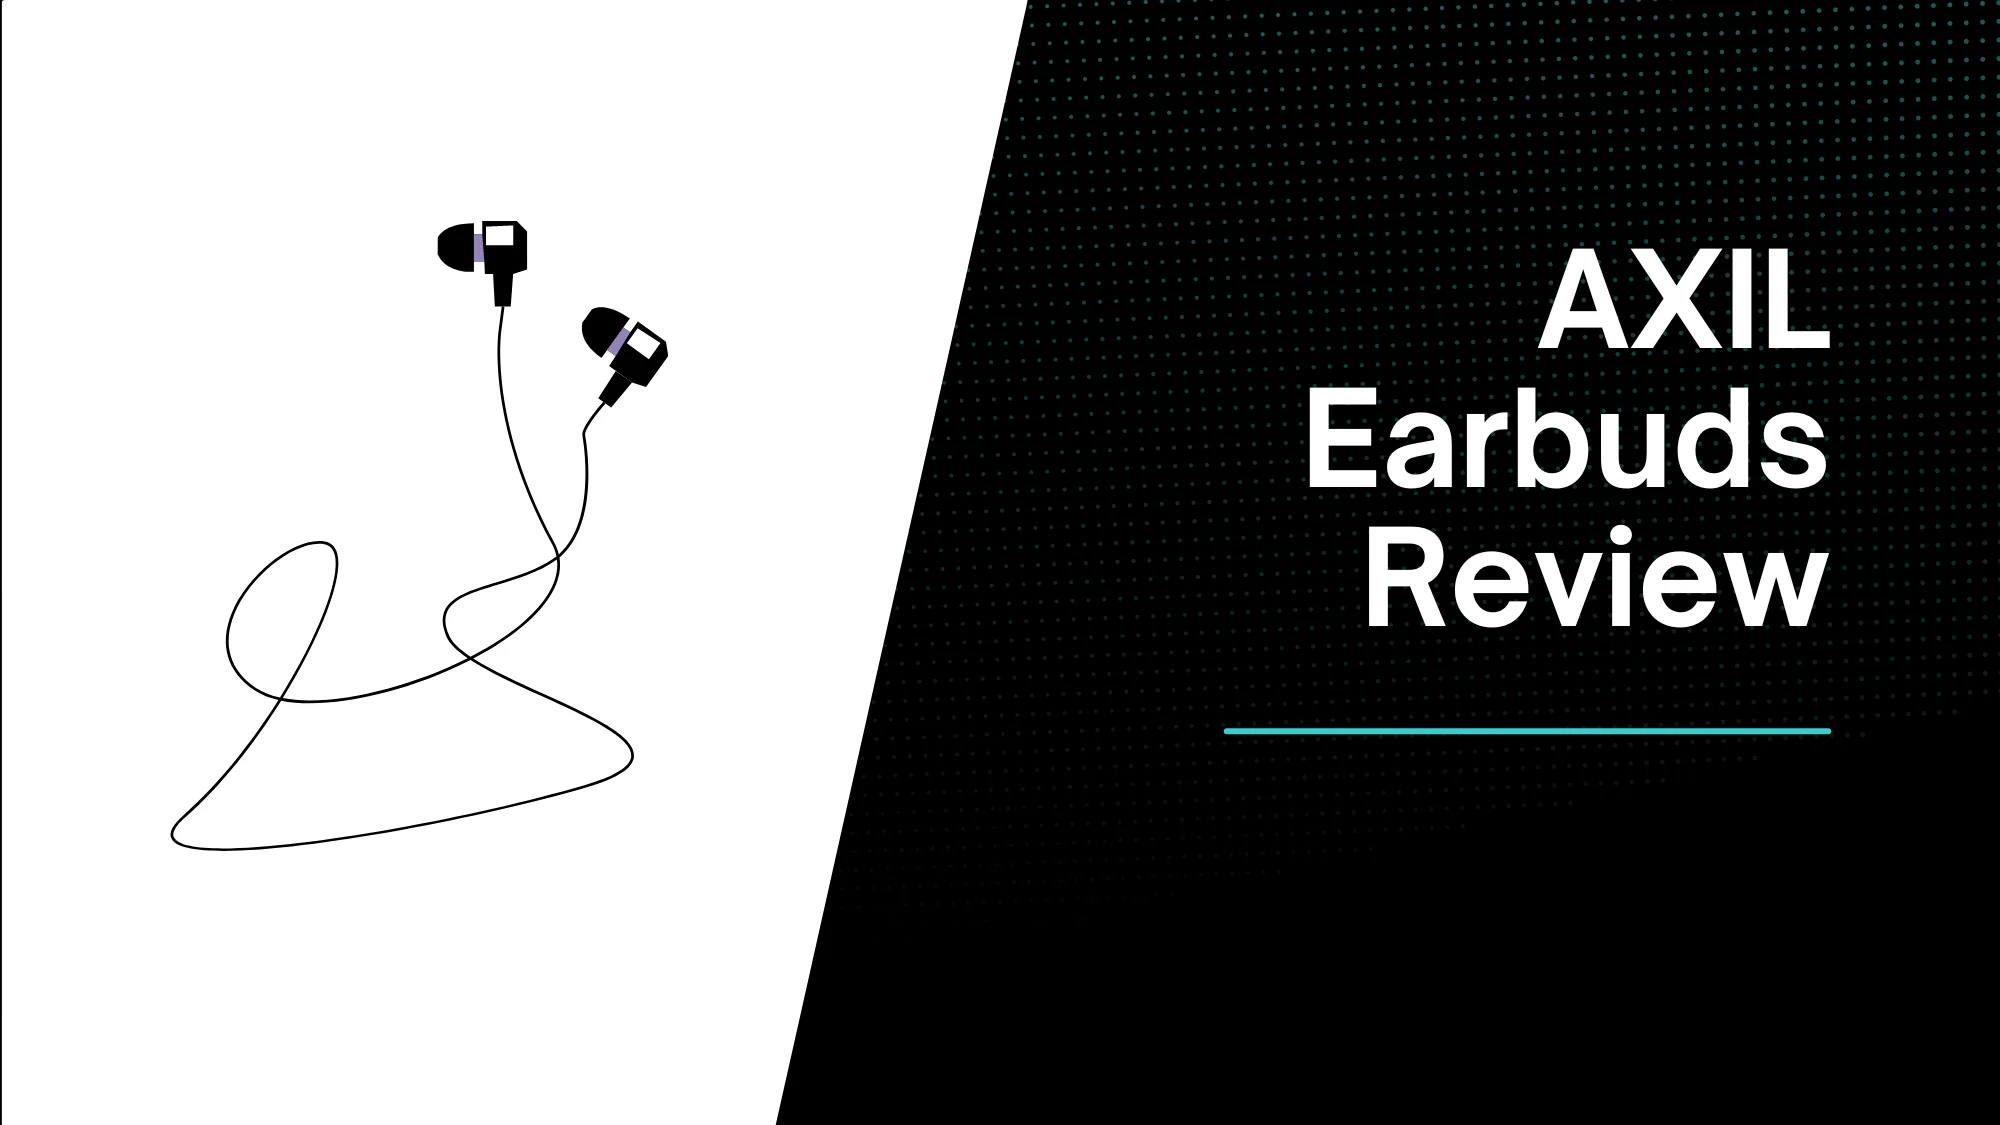 AXIL Earbuds Review Are they good